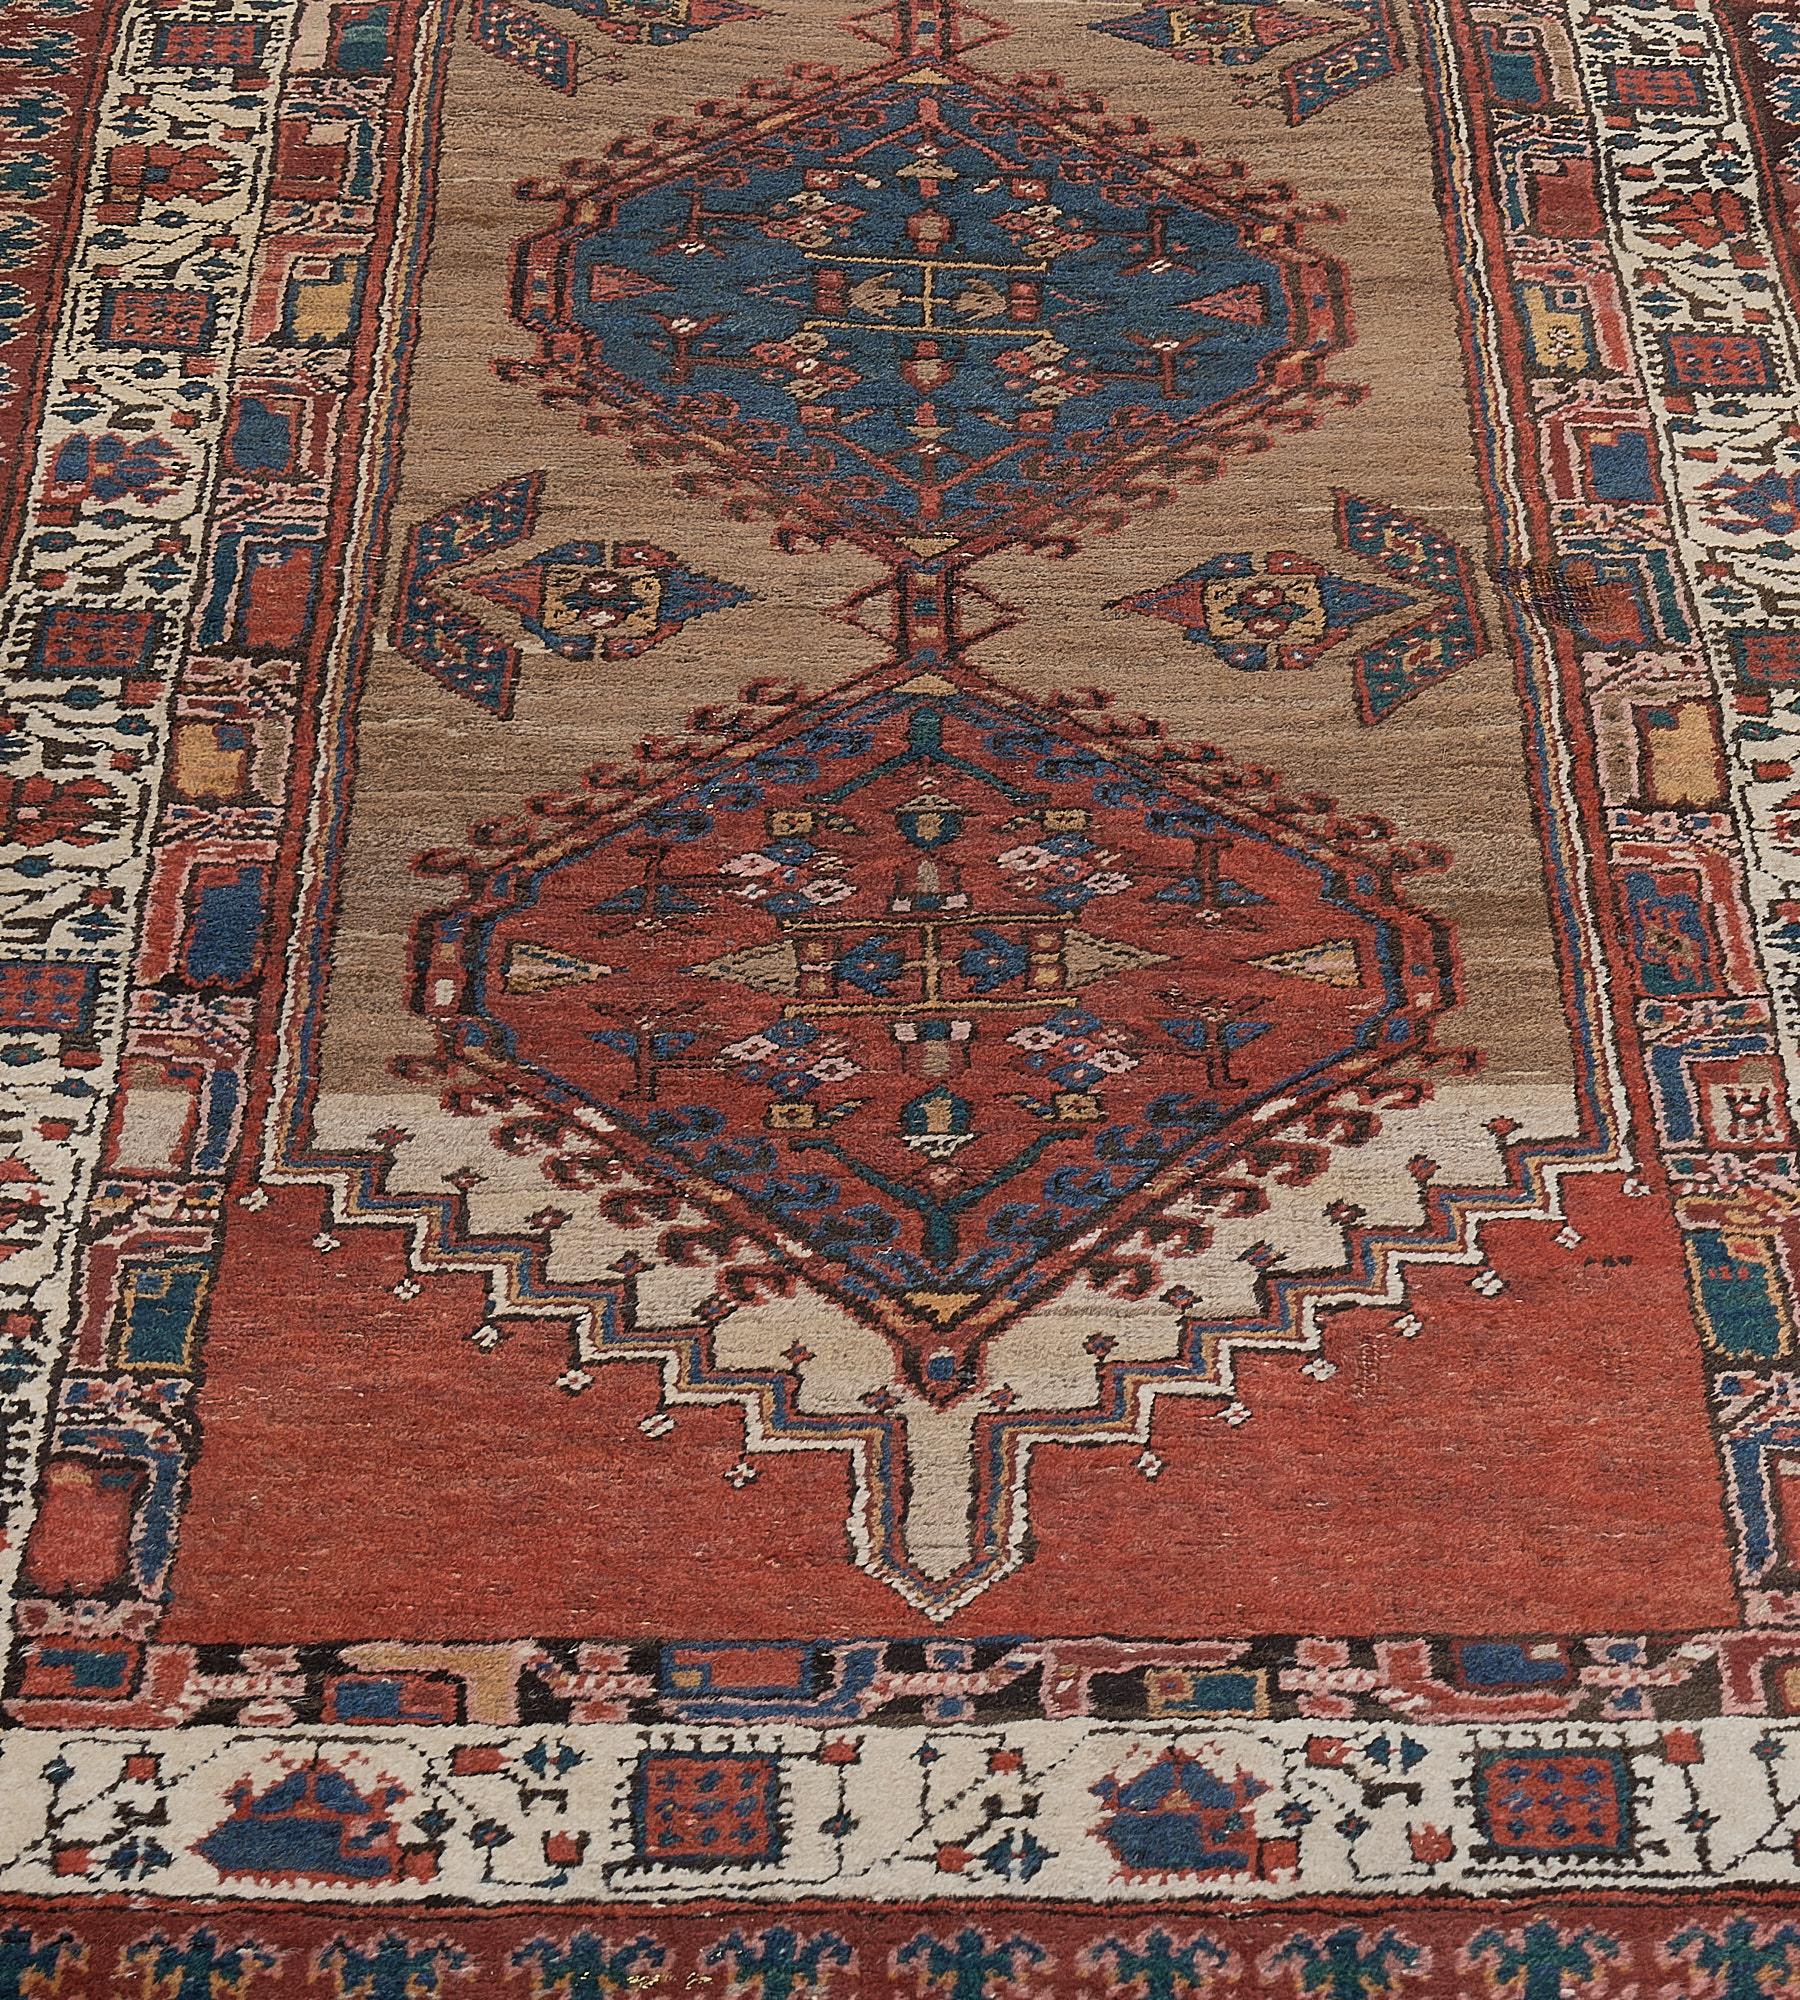 This antique Serab runner has a camel-brown field with a two pair of stylized leaves issuing flowerheads around a central column of three terracotta-red and blue hooked linked lozenges each containing a central open panel surrounded by a delicate